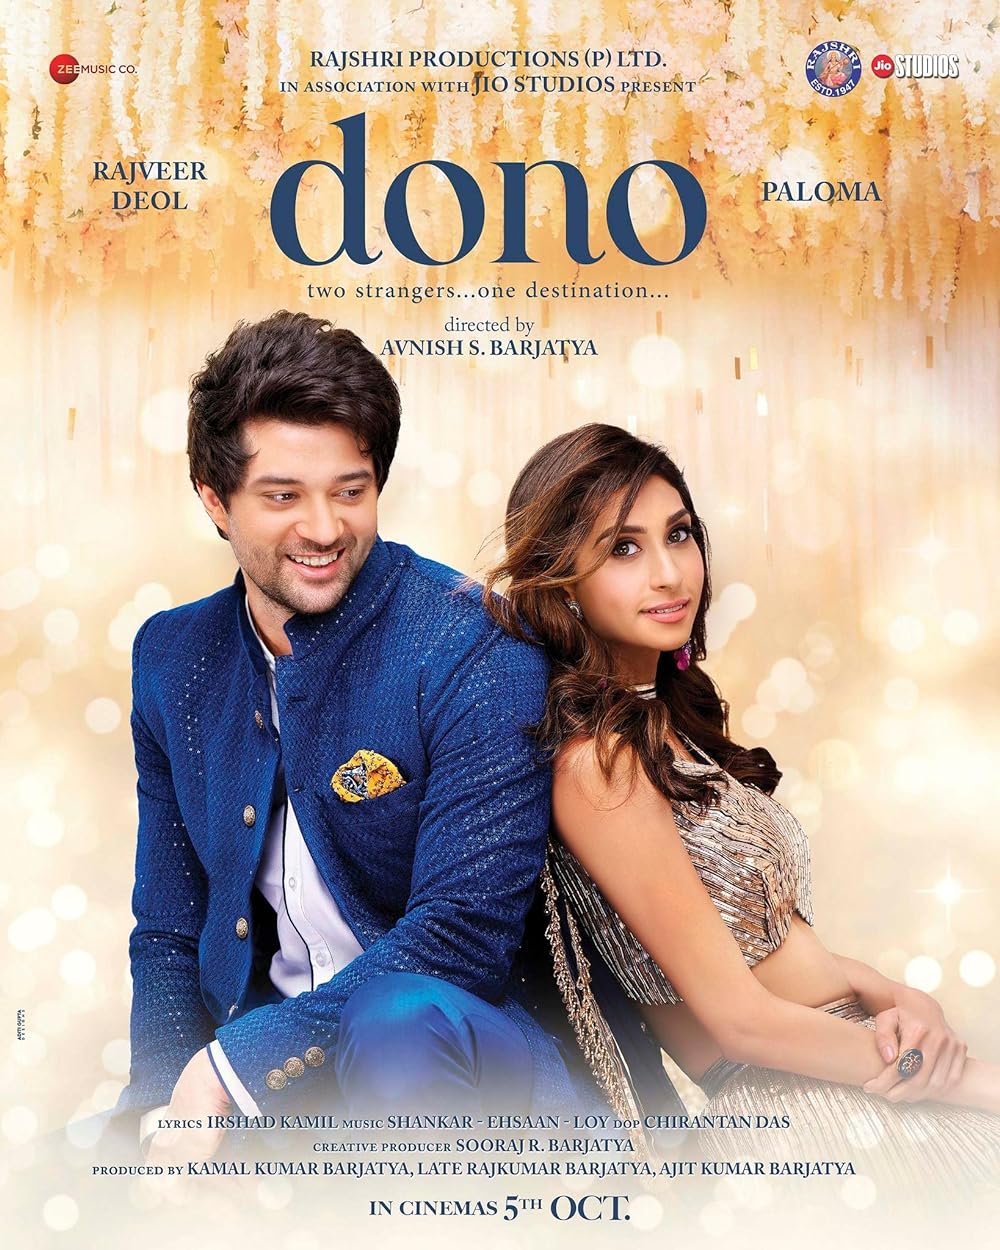 Dono (December 29) - Streaming on ZEE5Dono revolves around Dev and Meghna's unexpected romantic journey during a destination wedding in Thailand, sparking emotional healing and new beginnings.